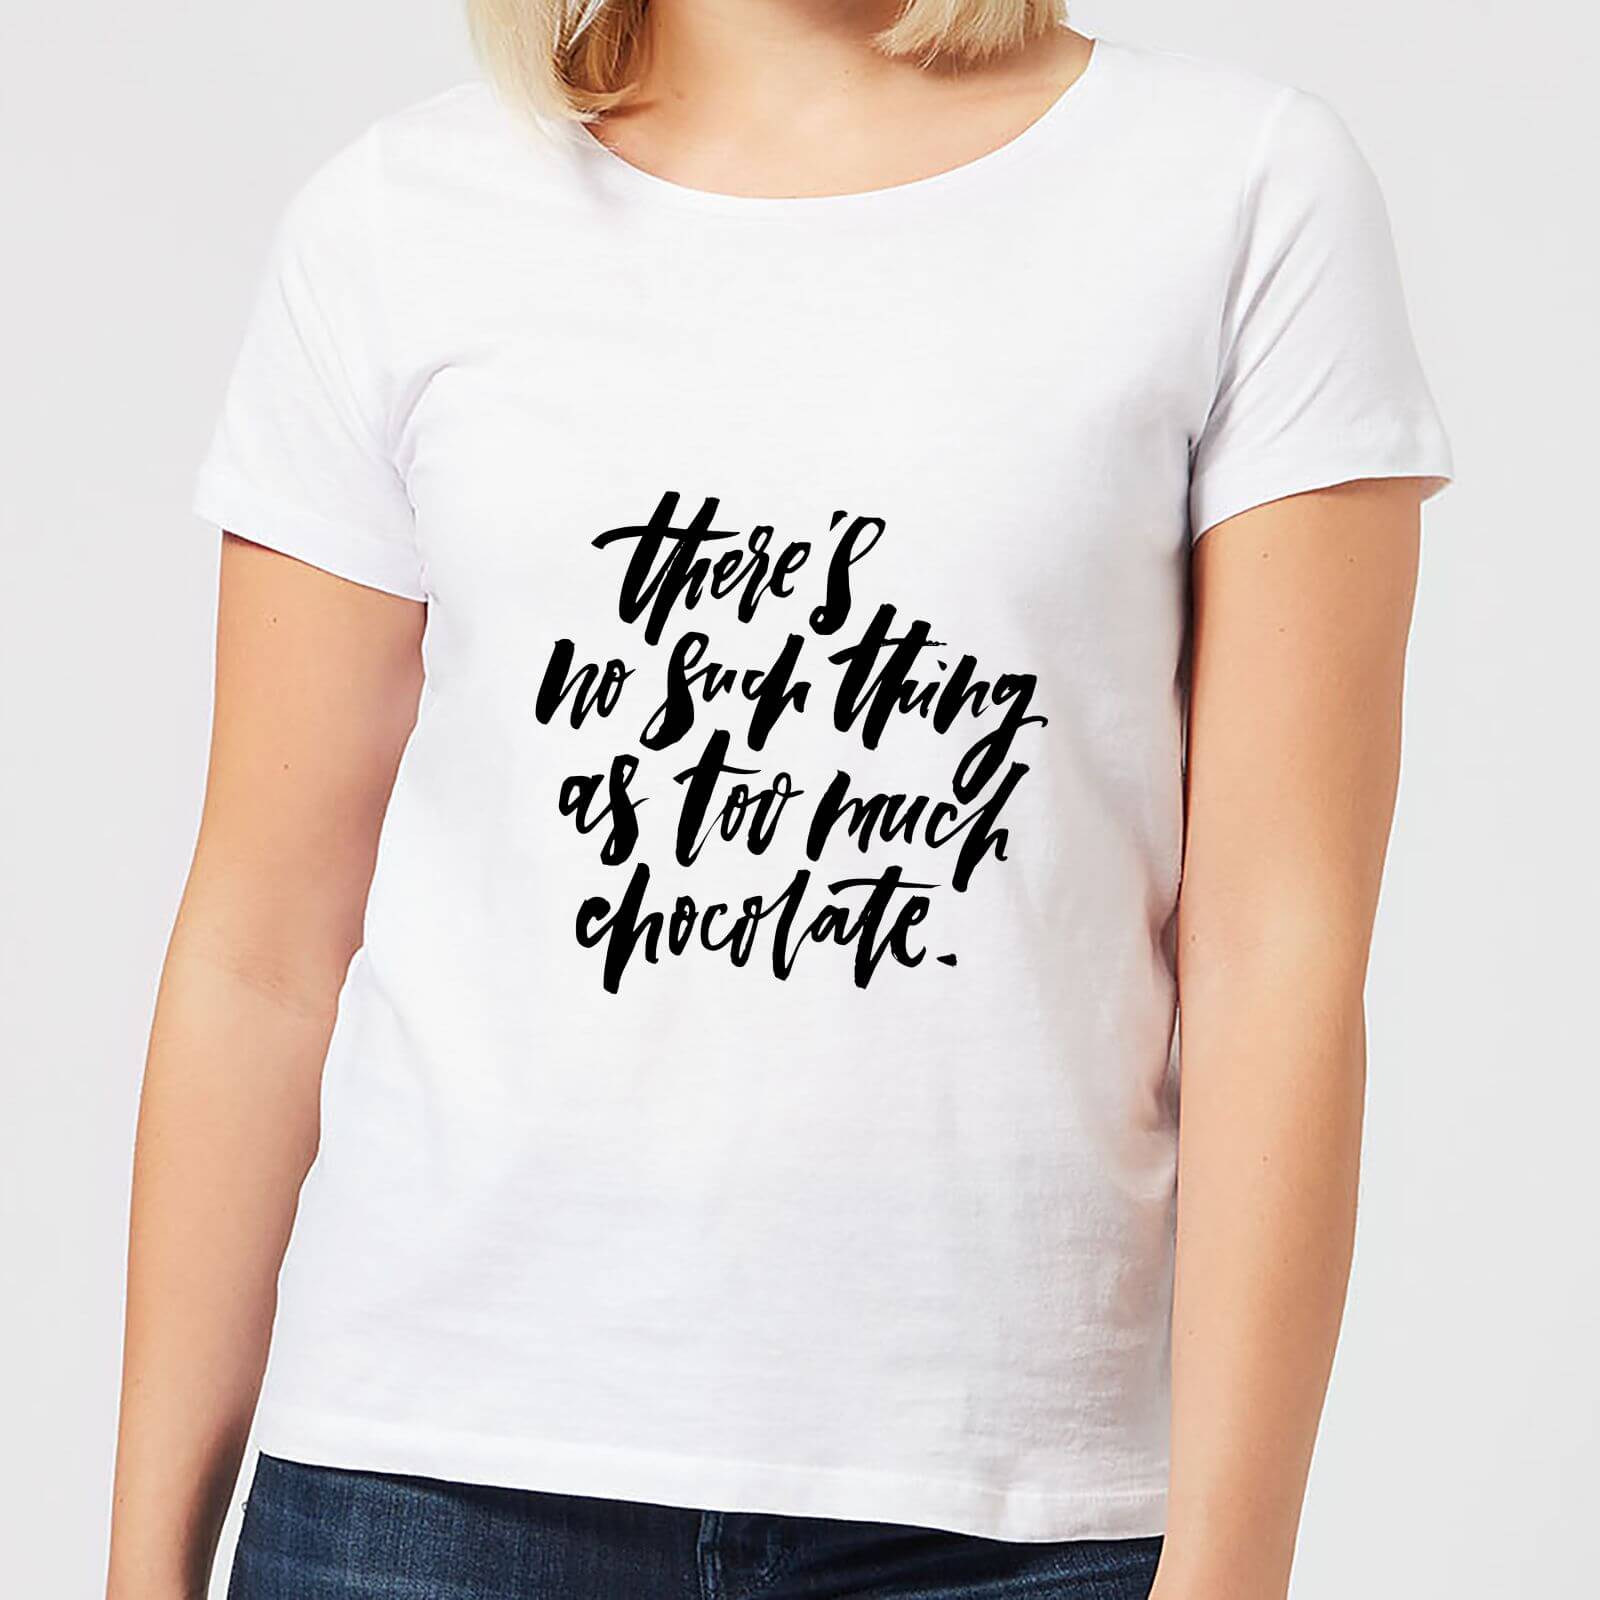 There's No Such Thing As Too Much Chocolate Women's T-Shirt - White - S - White